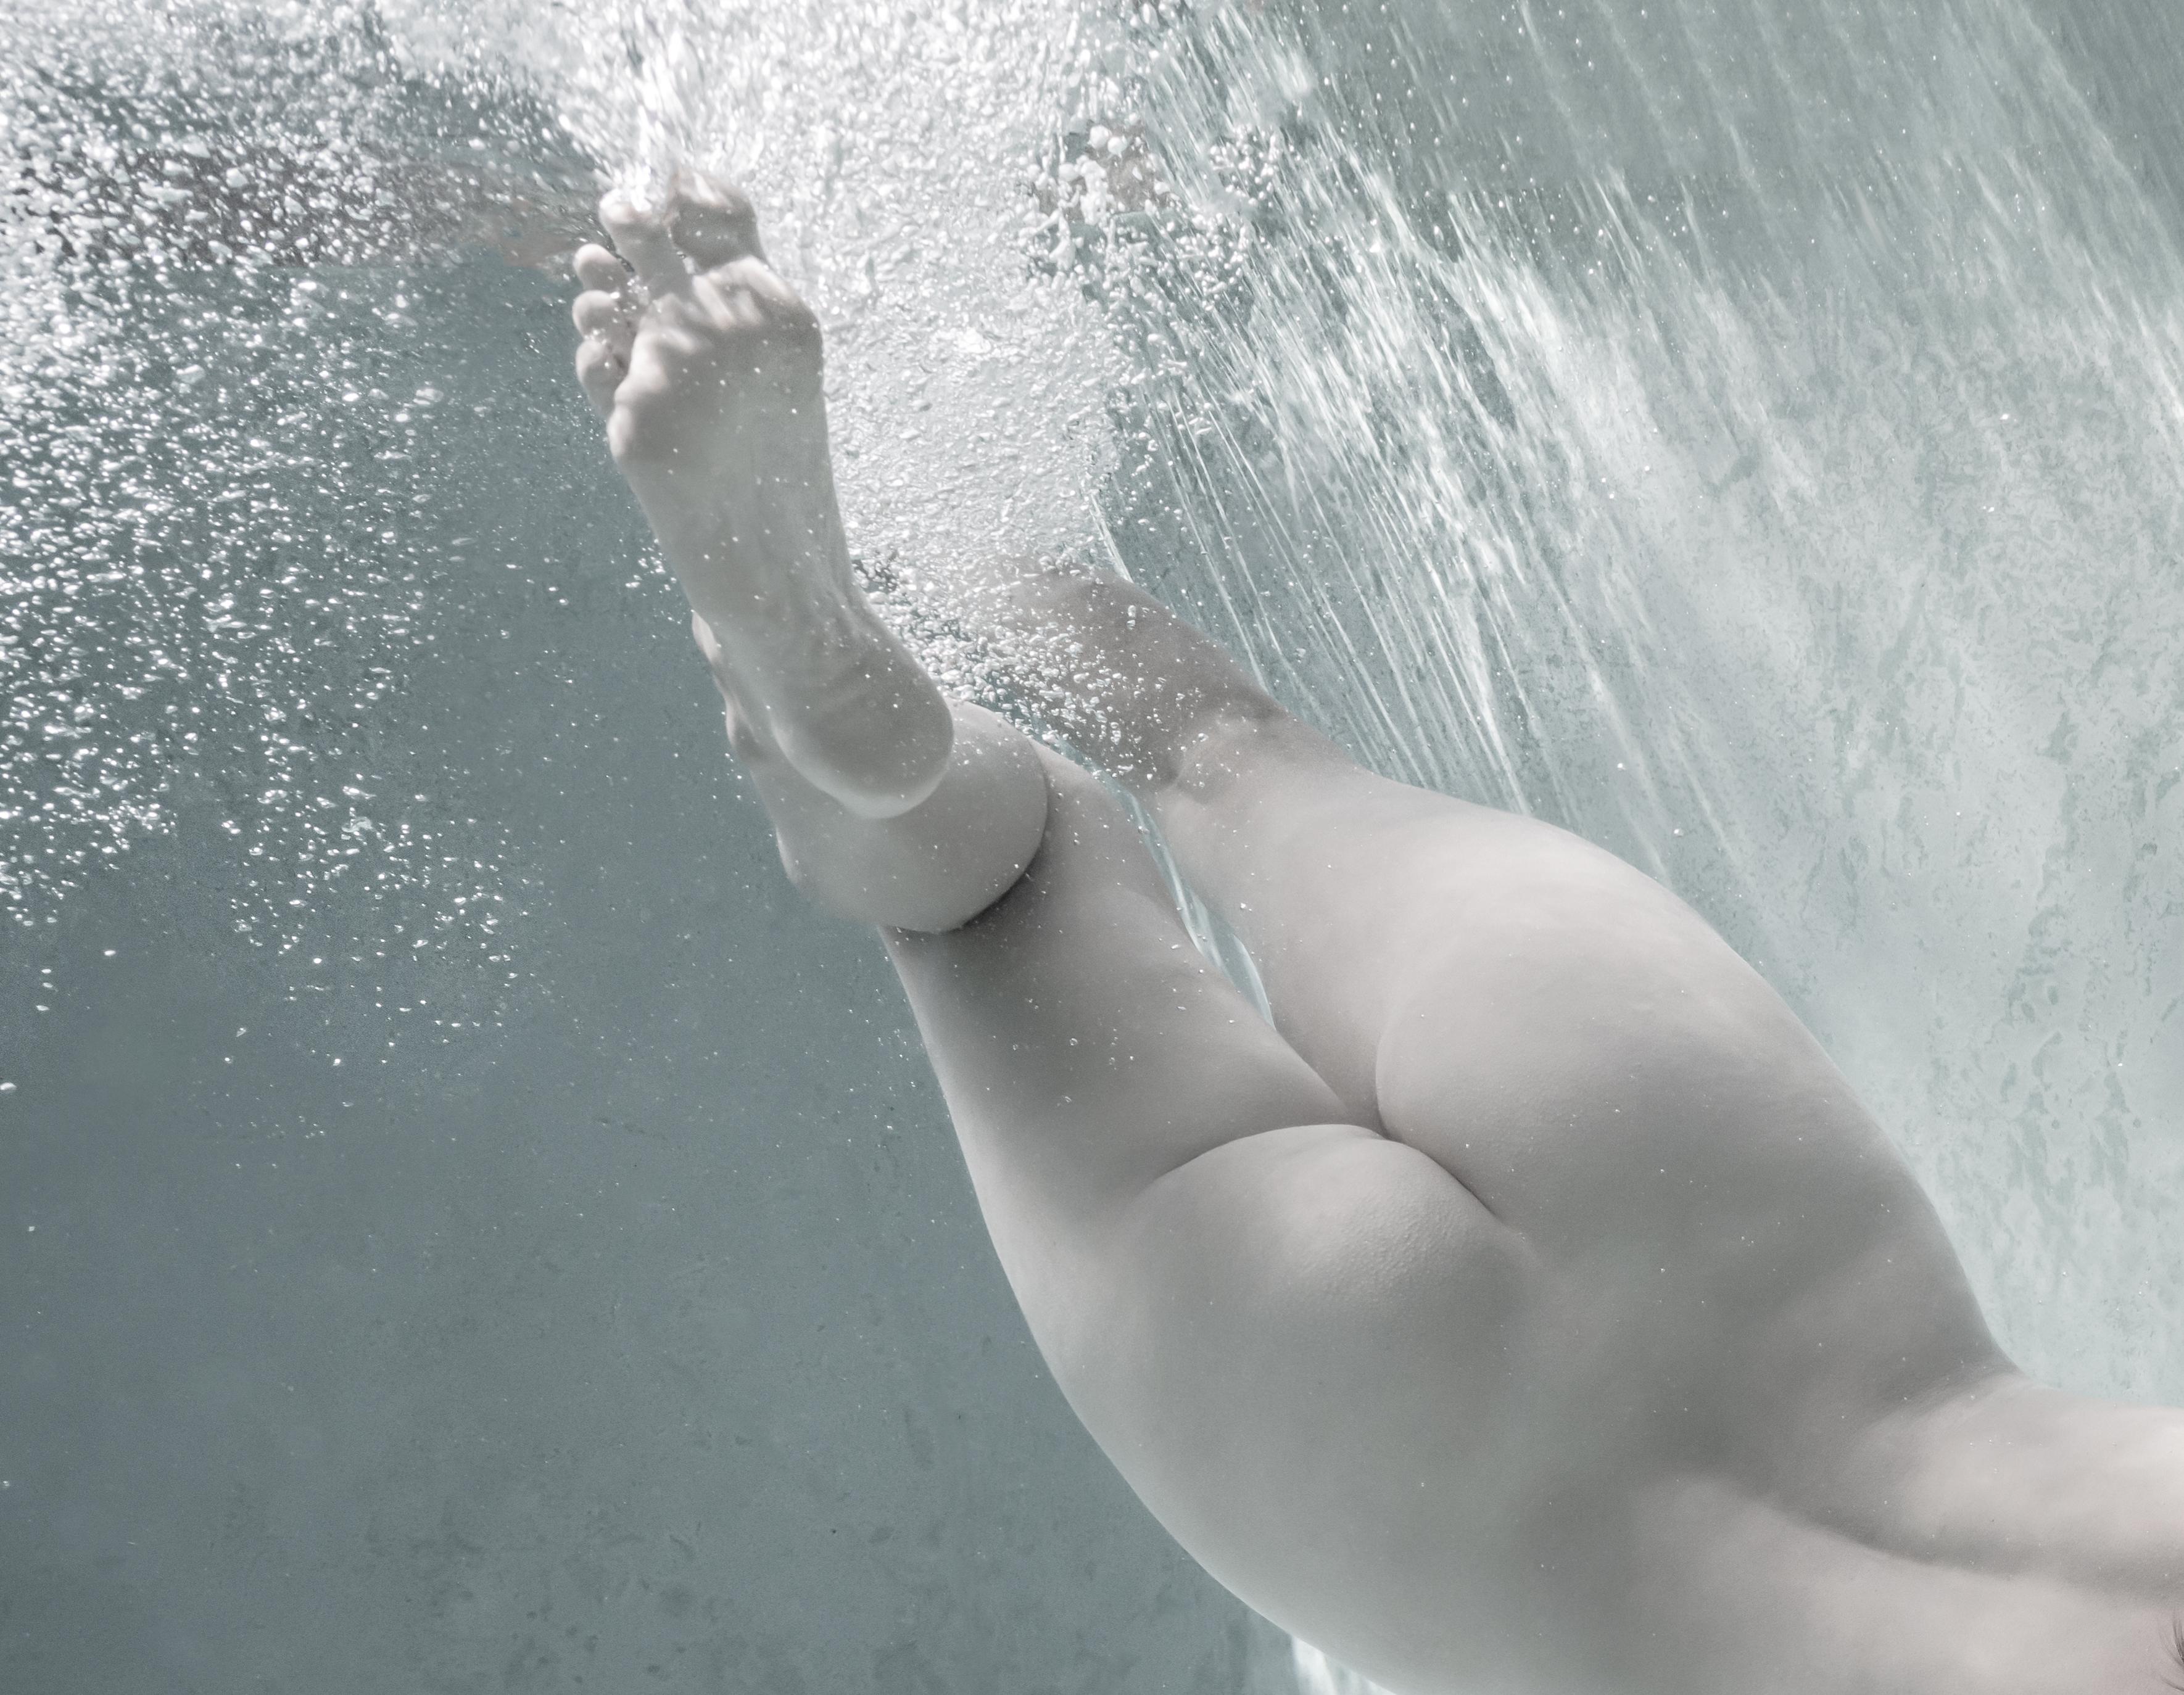 Sweet and Spicy - underwater nude photograph - archival pigment print 18x24